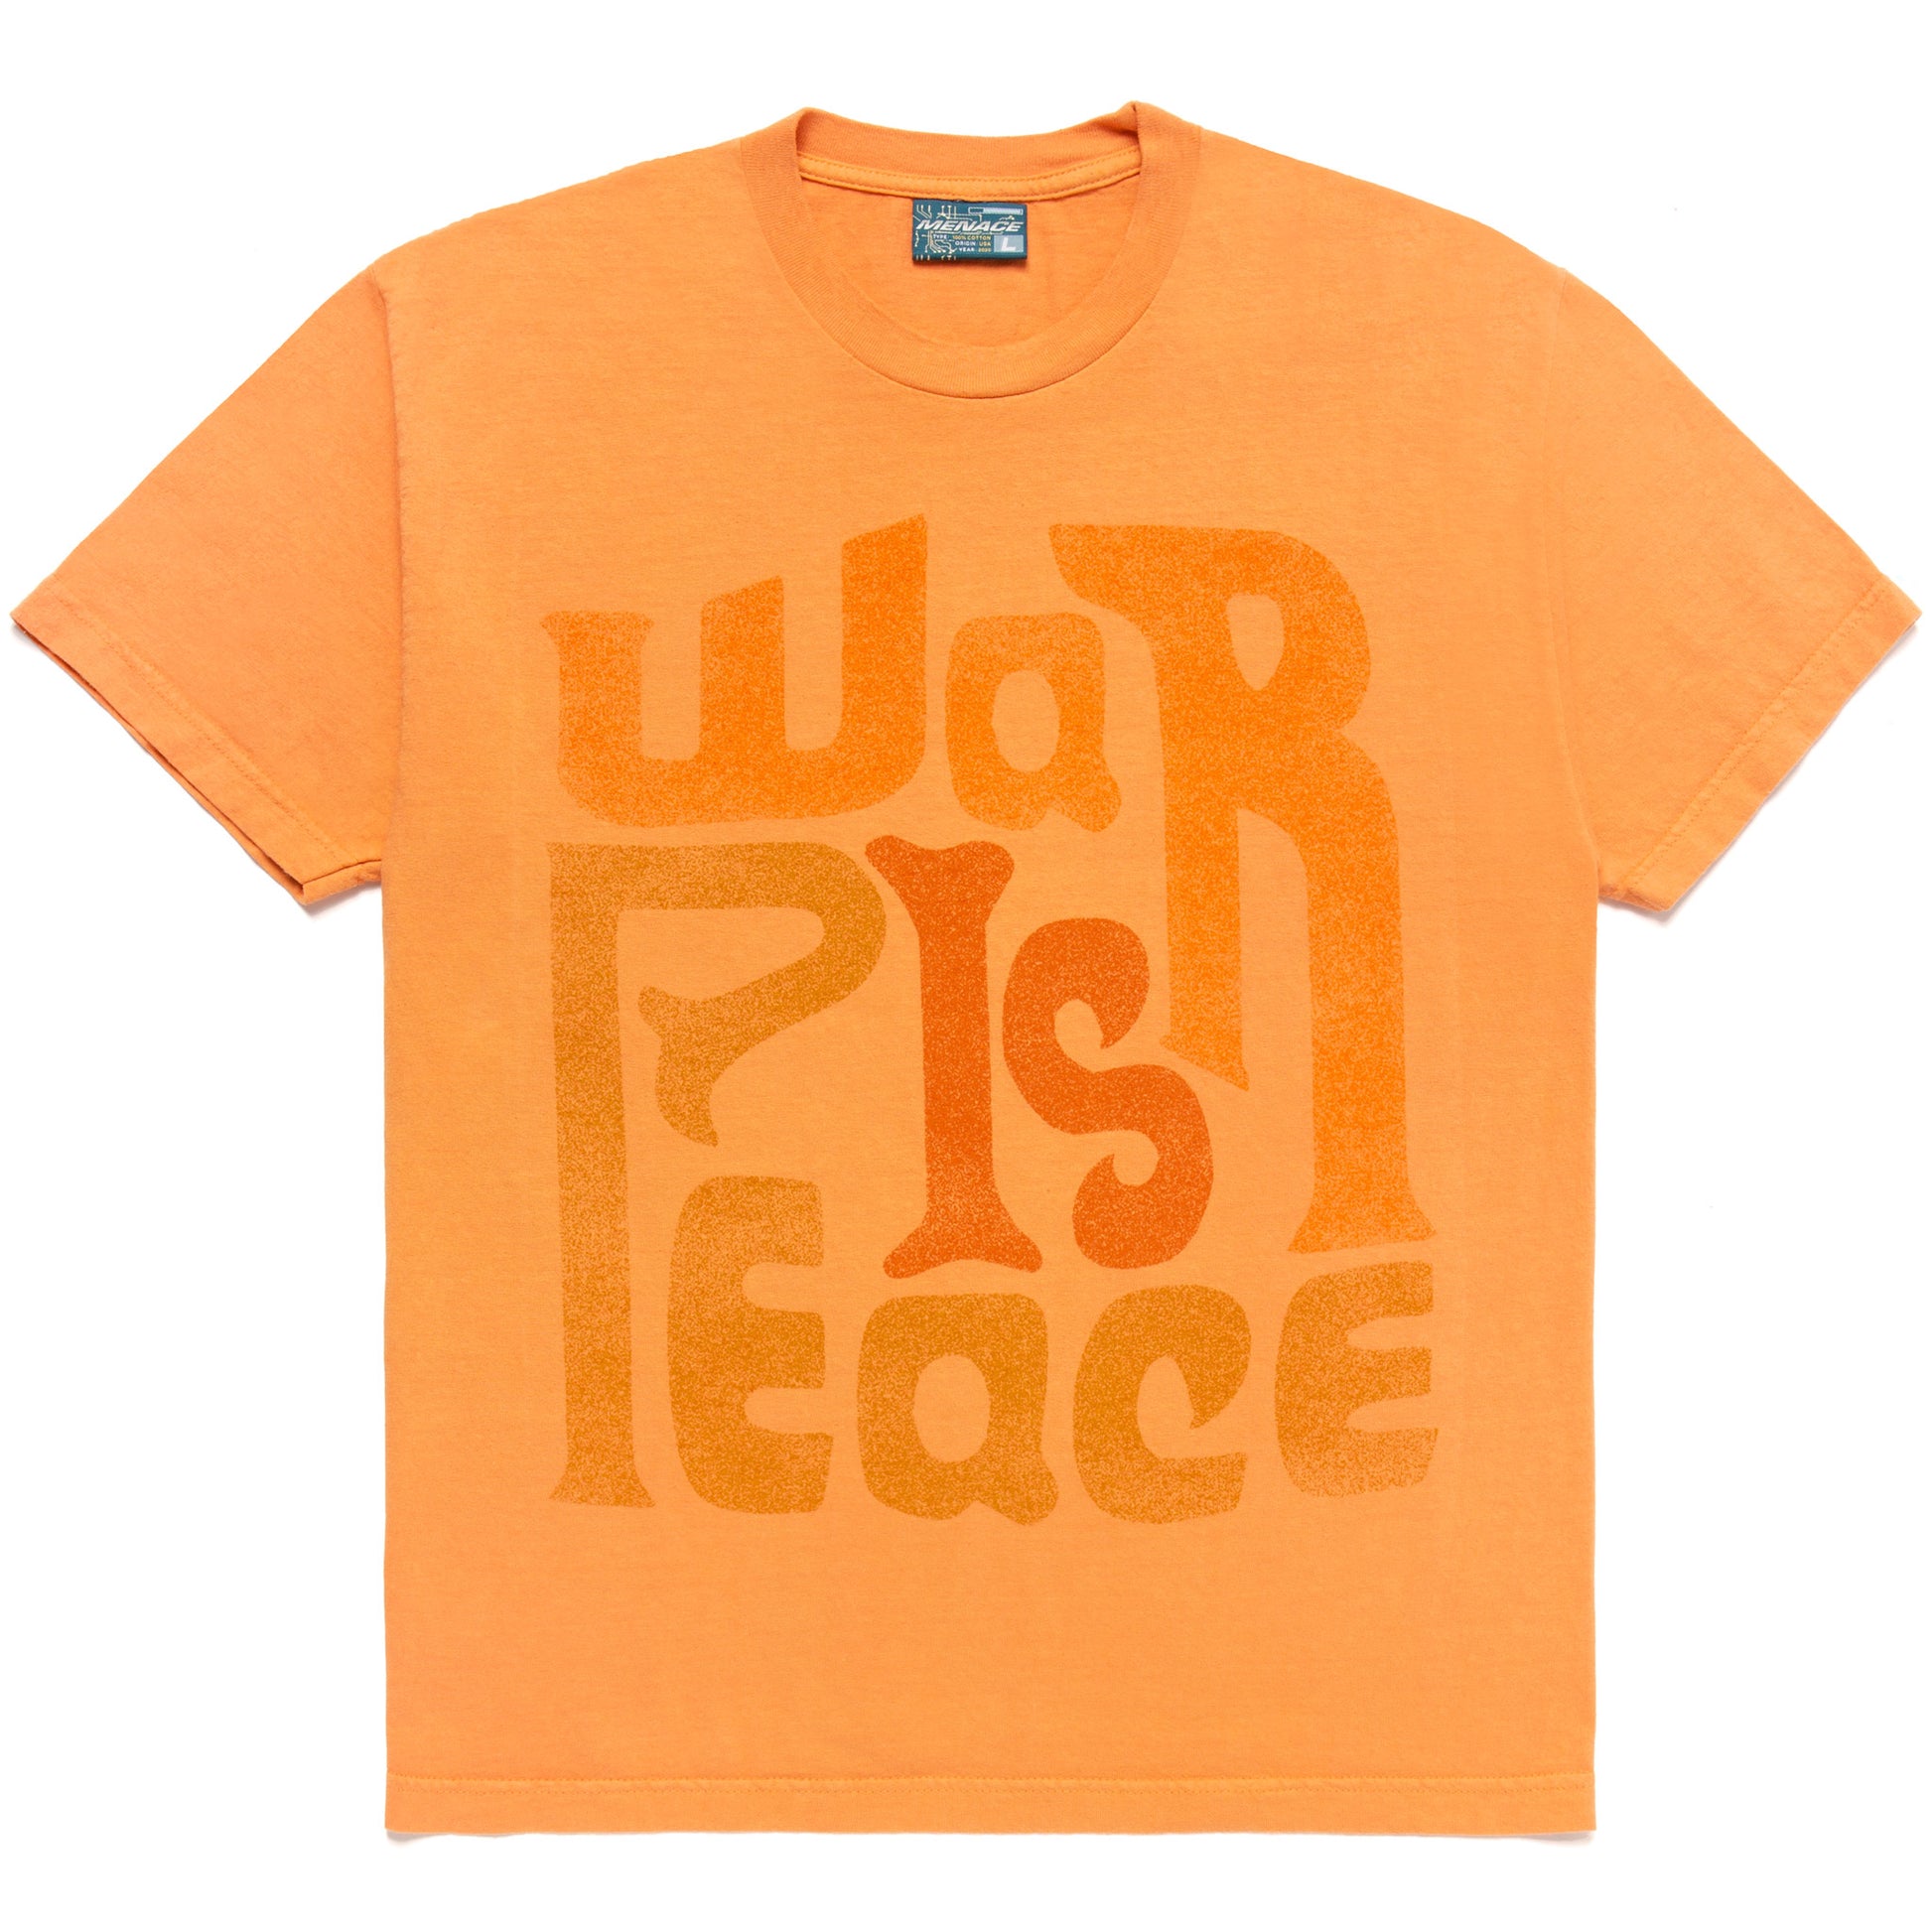 WAR IS PEACE T-SHIRT by MENACE